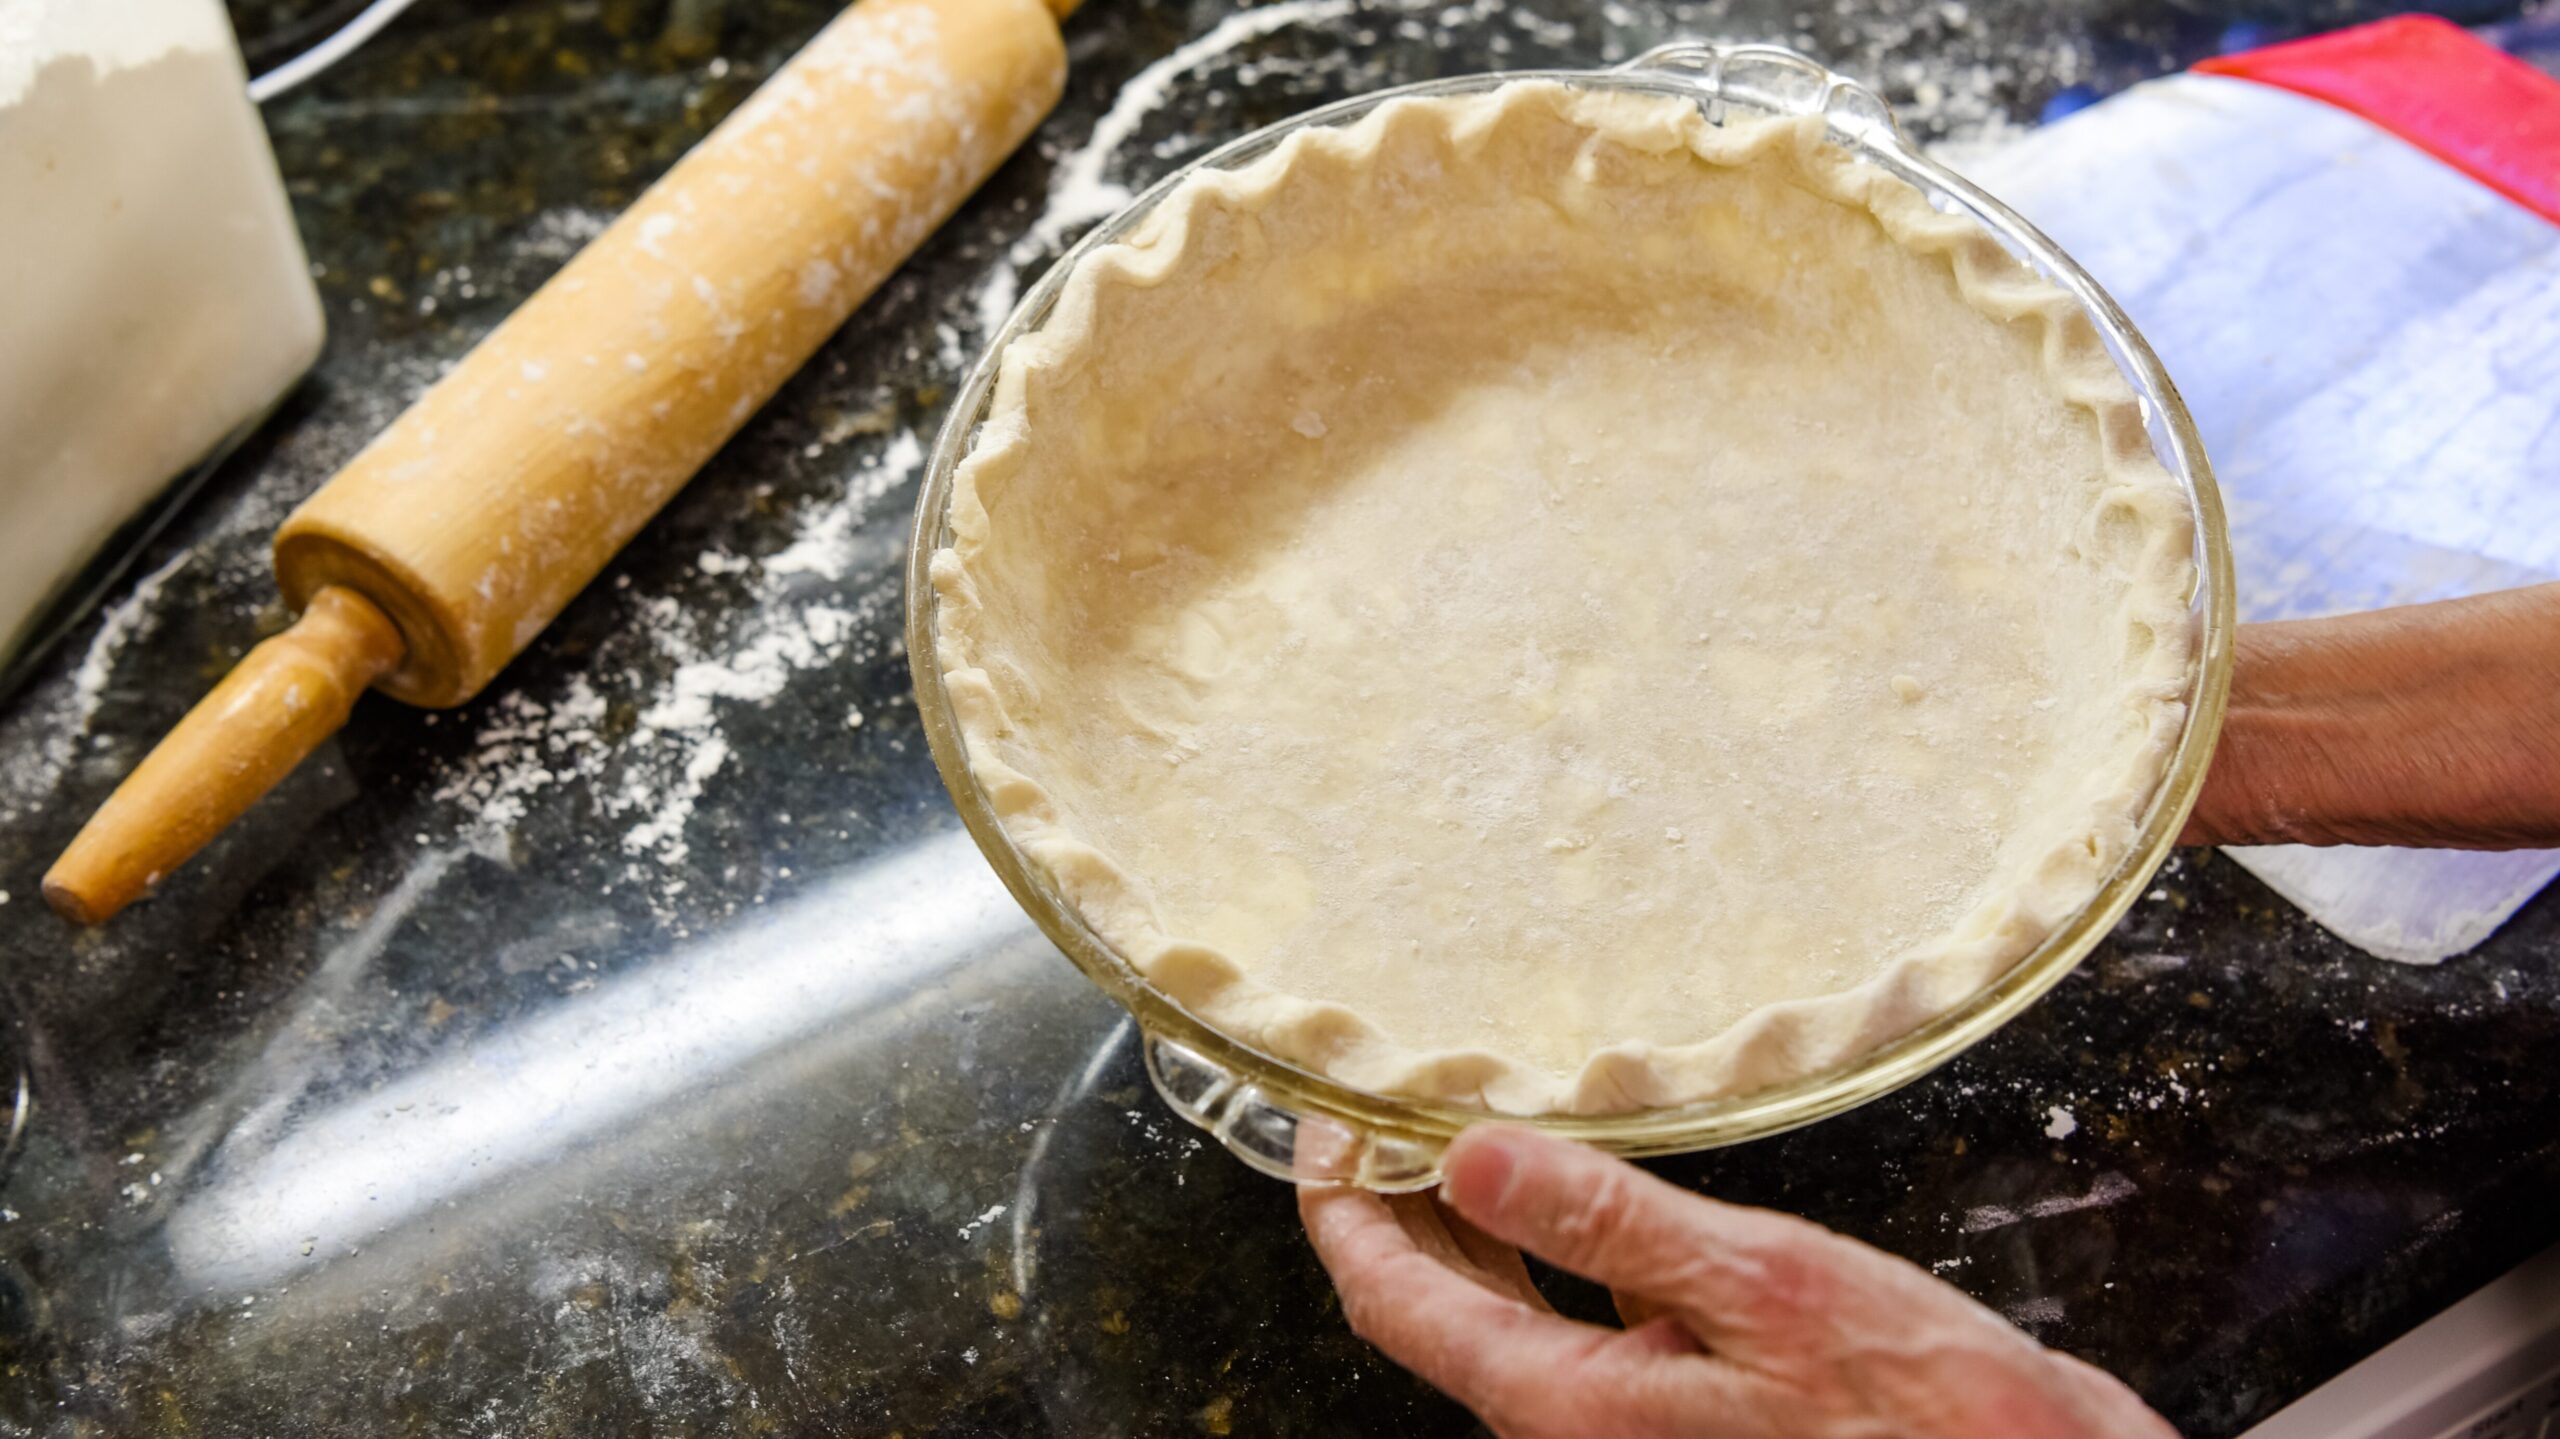 a beautifully cream pie crust is ready for its fil 2022 11 05 00 06 53 utc edited scaled